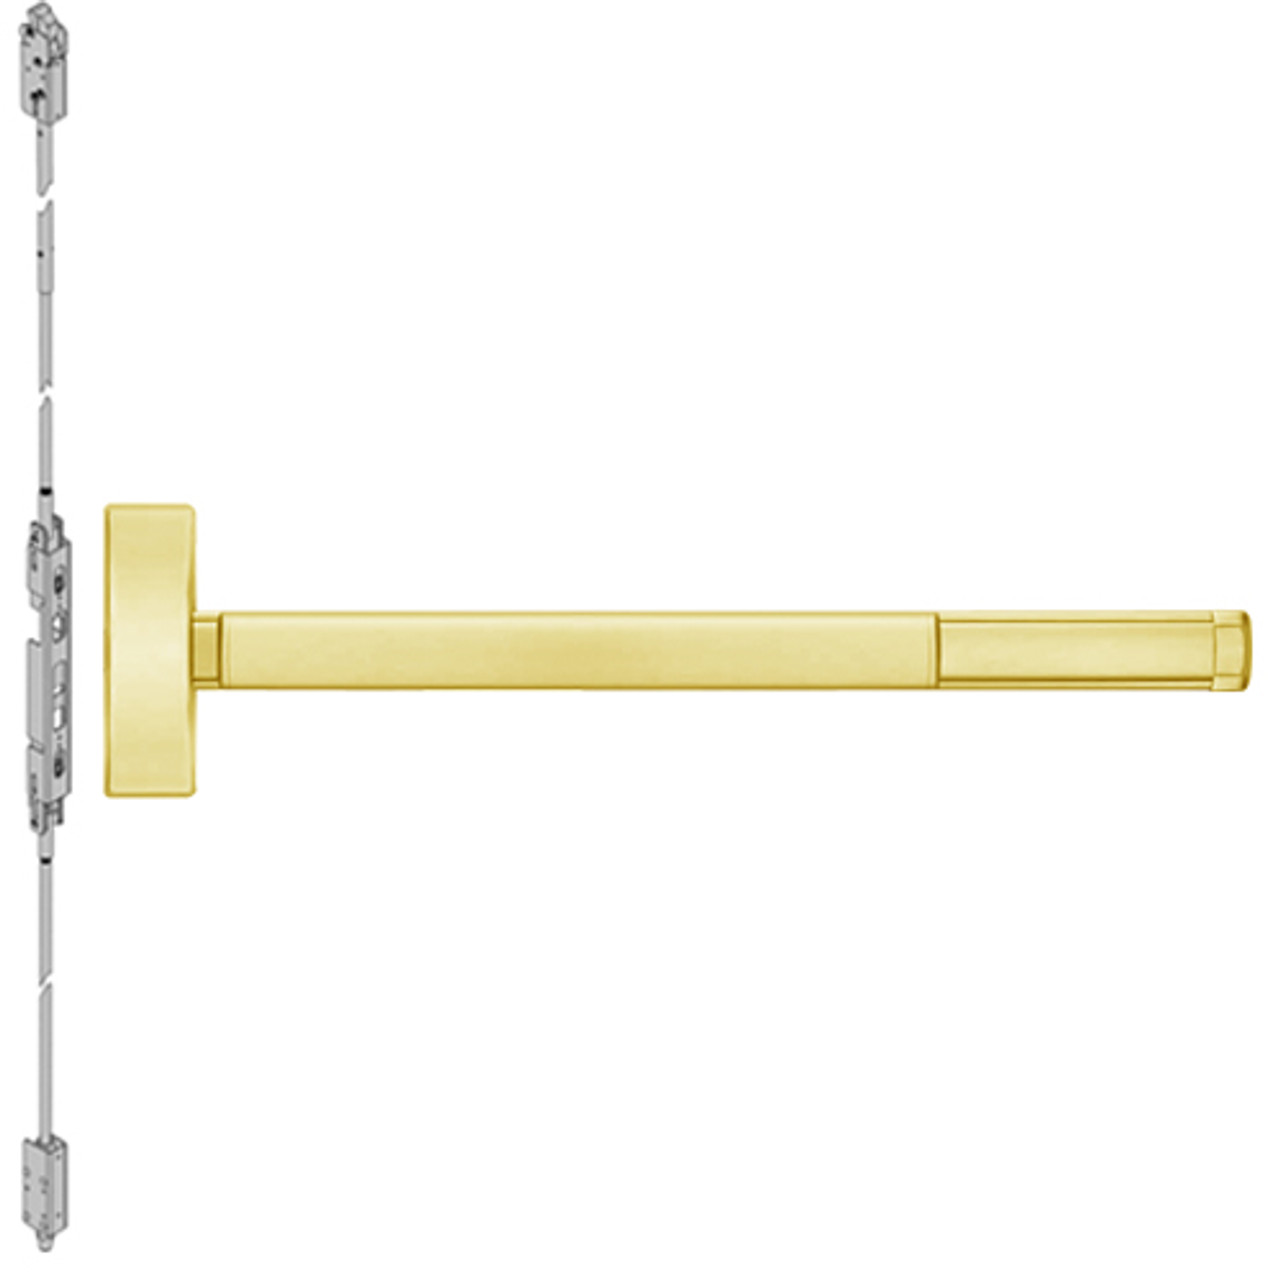 ELRFL2814LBR-605-36 PHI 2800 Series Fire Rated Concealed Vertical Rod Exit Device with Electric Latch Retraction Prepped for Lever-Knob Always Active in Bright Brass Finish